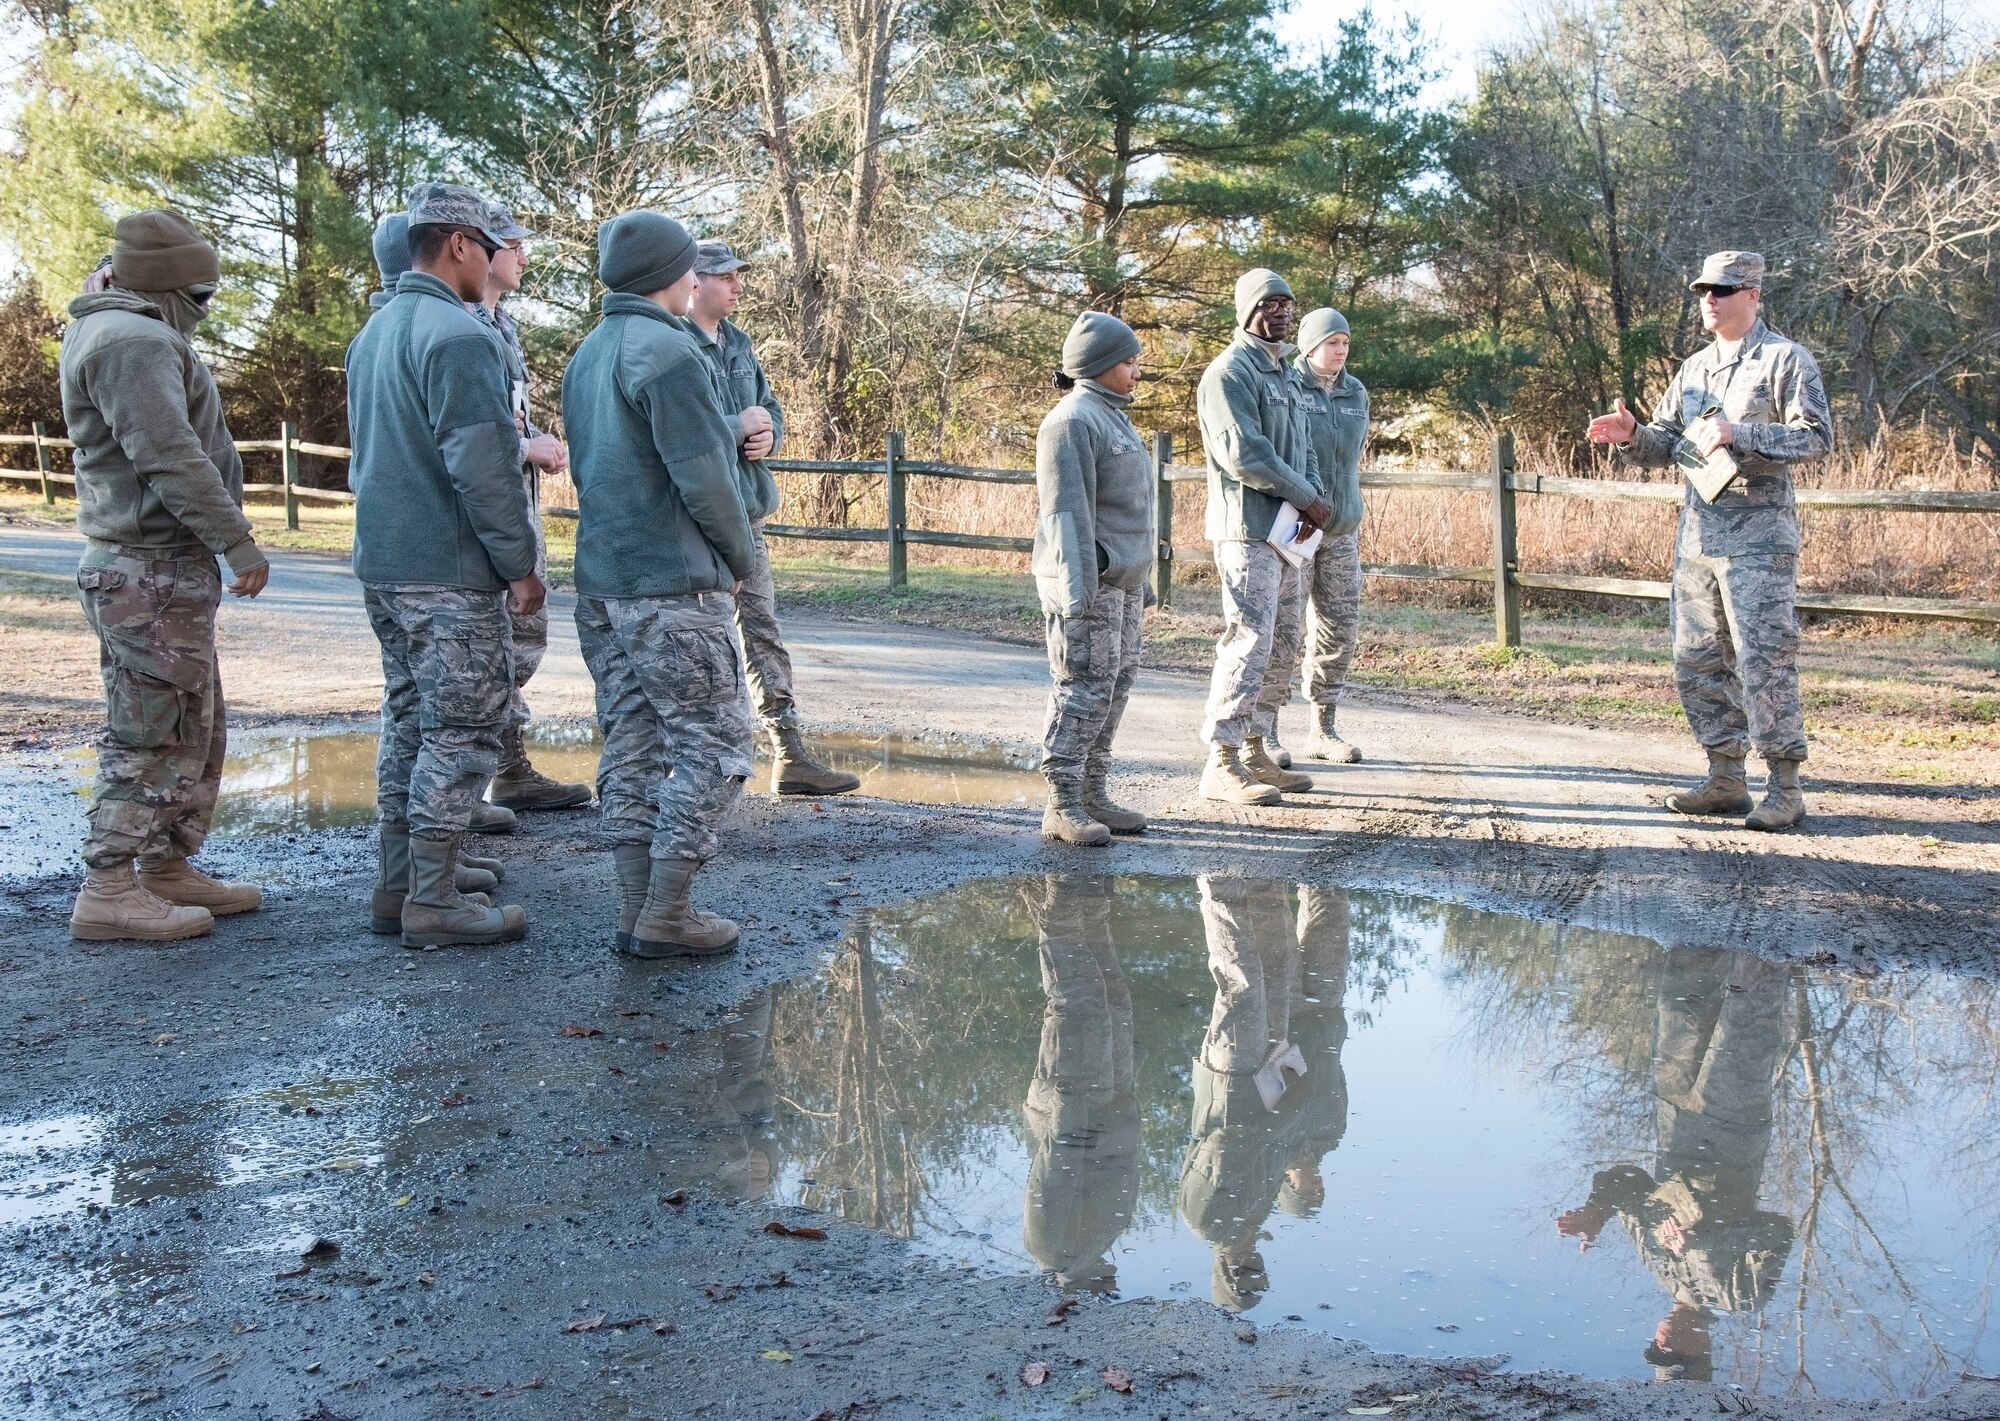 Master Sgt. Jason McNabb, 436th Civil Engineer Squadron engineering flight superintendent, briefs engineering assistants prior to an aircraft mishap survey exercise Dec. 18, 2018, near Killens Pond State Park, Kent County, Del. McNabb briefed the EA survey team of a simulated T-38 Talon aircraft mishap. (U.S. Air Force photo by Roland Balik)